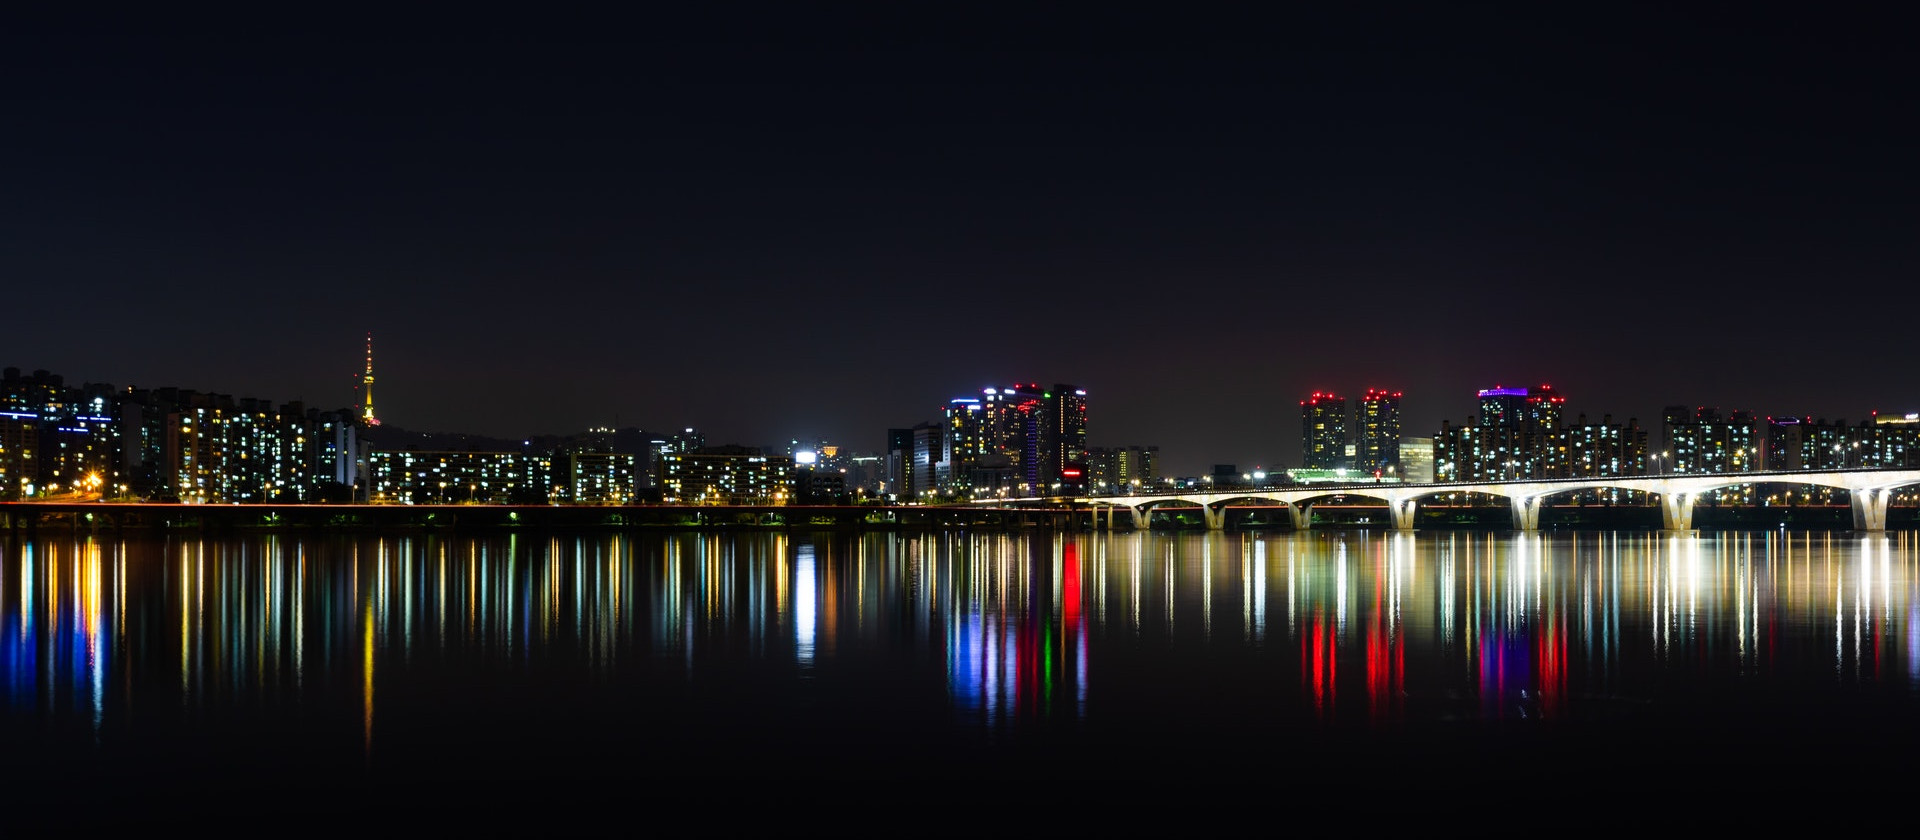 Skyline of Seoul across the Han River at night